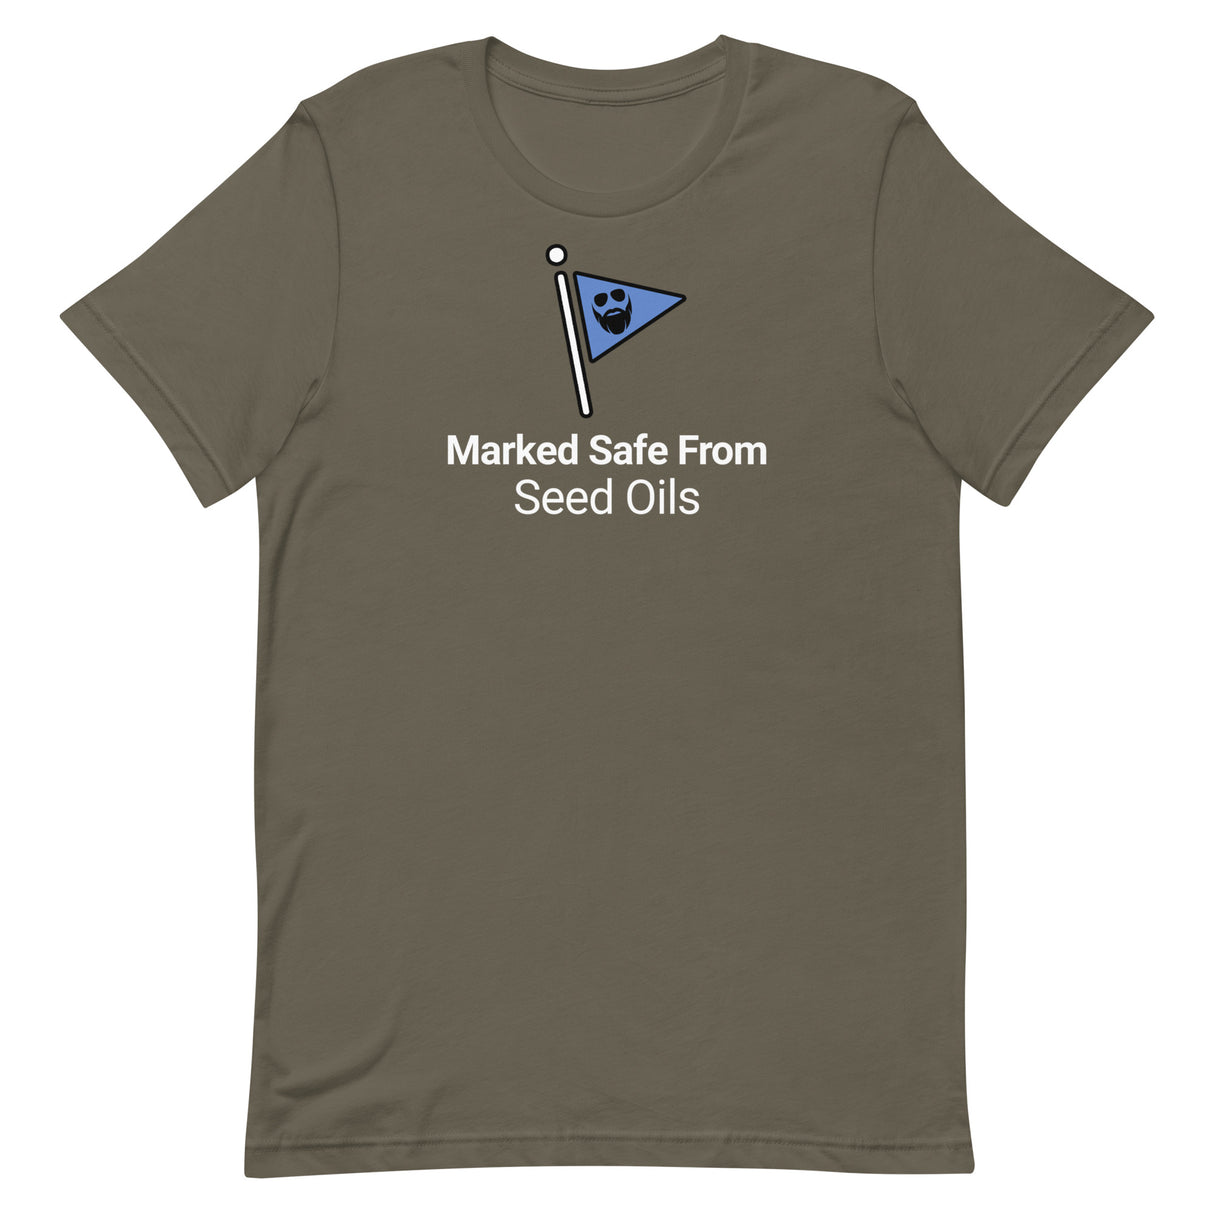 Marked Safe From Seed Oils Dye T-Shirt